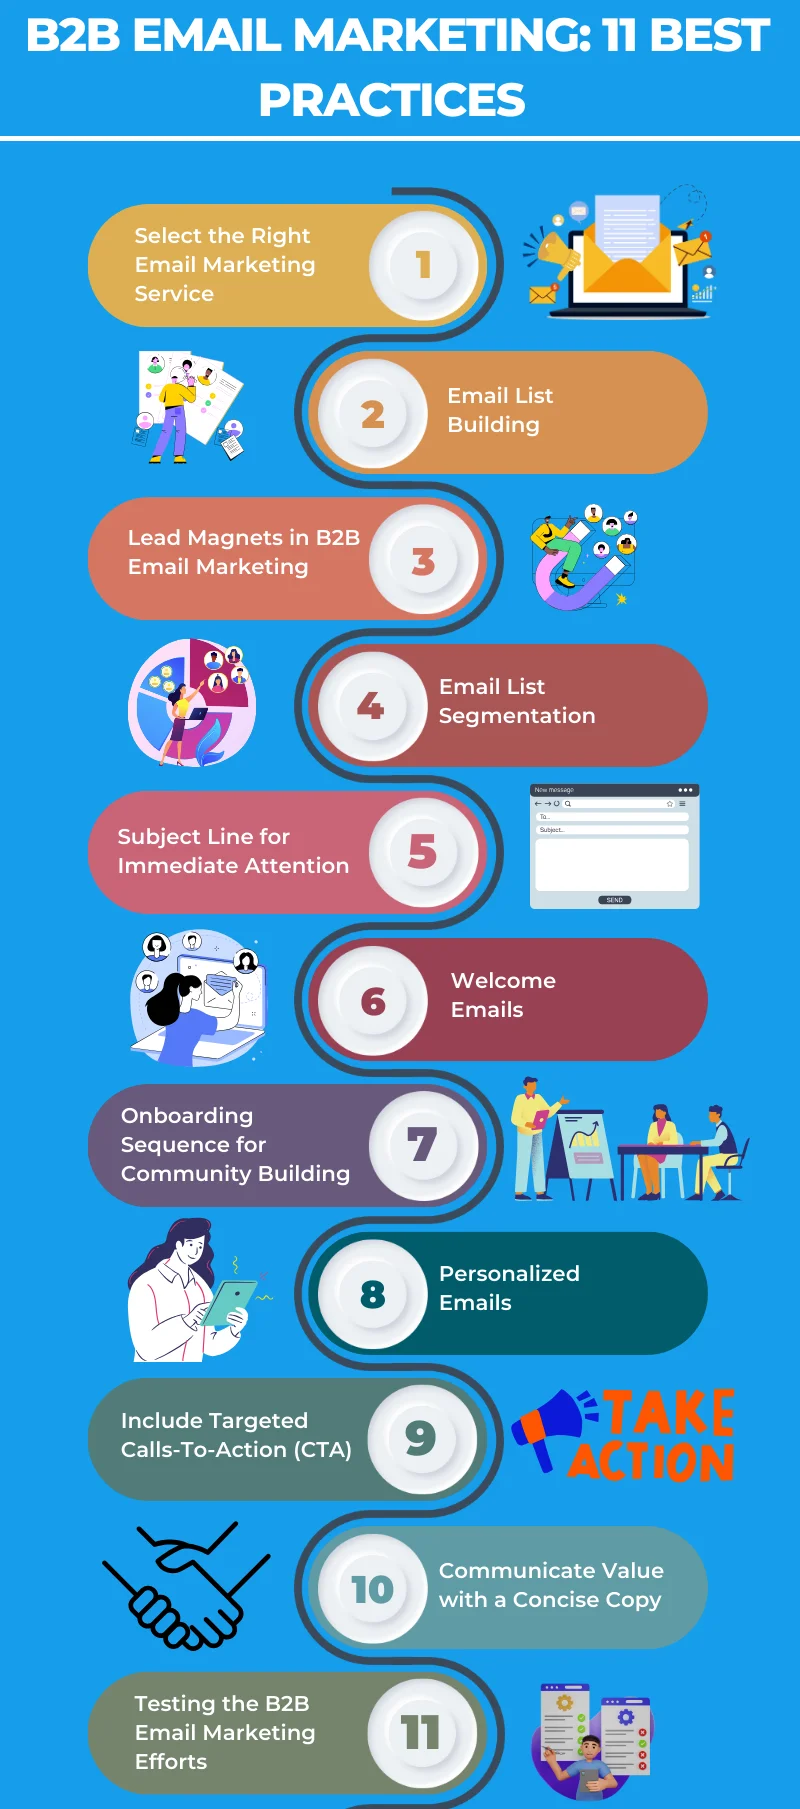 An infographic on 11 b2b email marketing best practices 